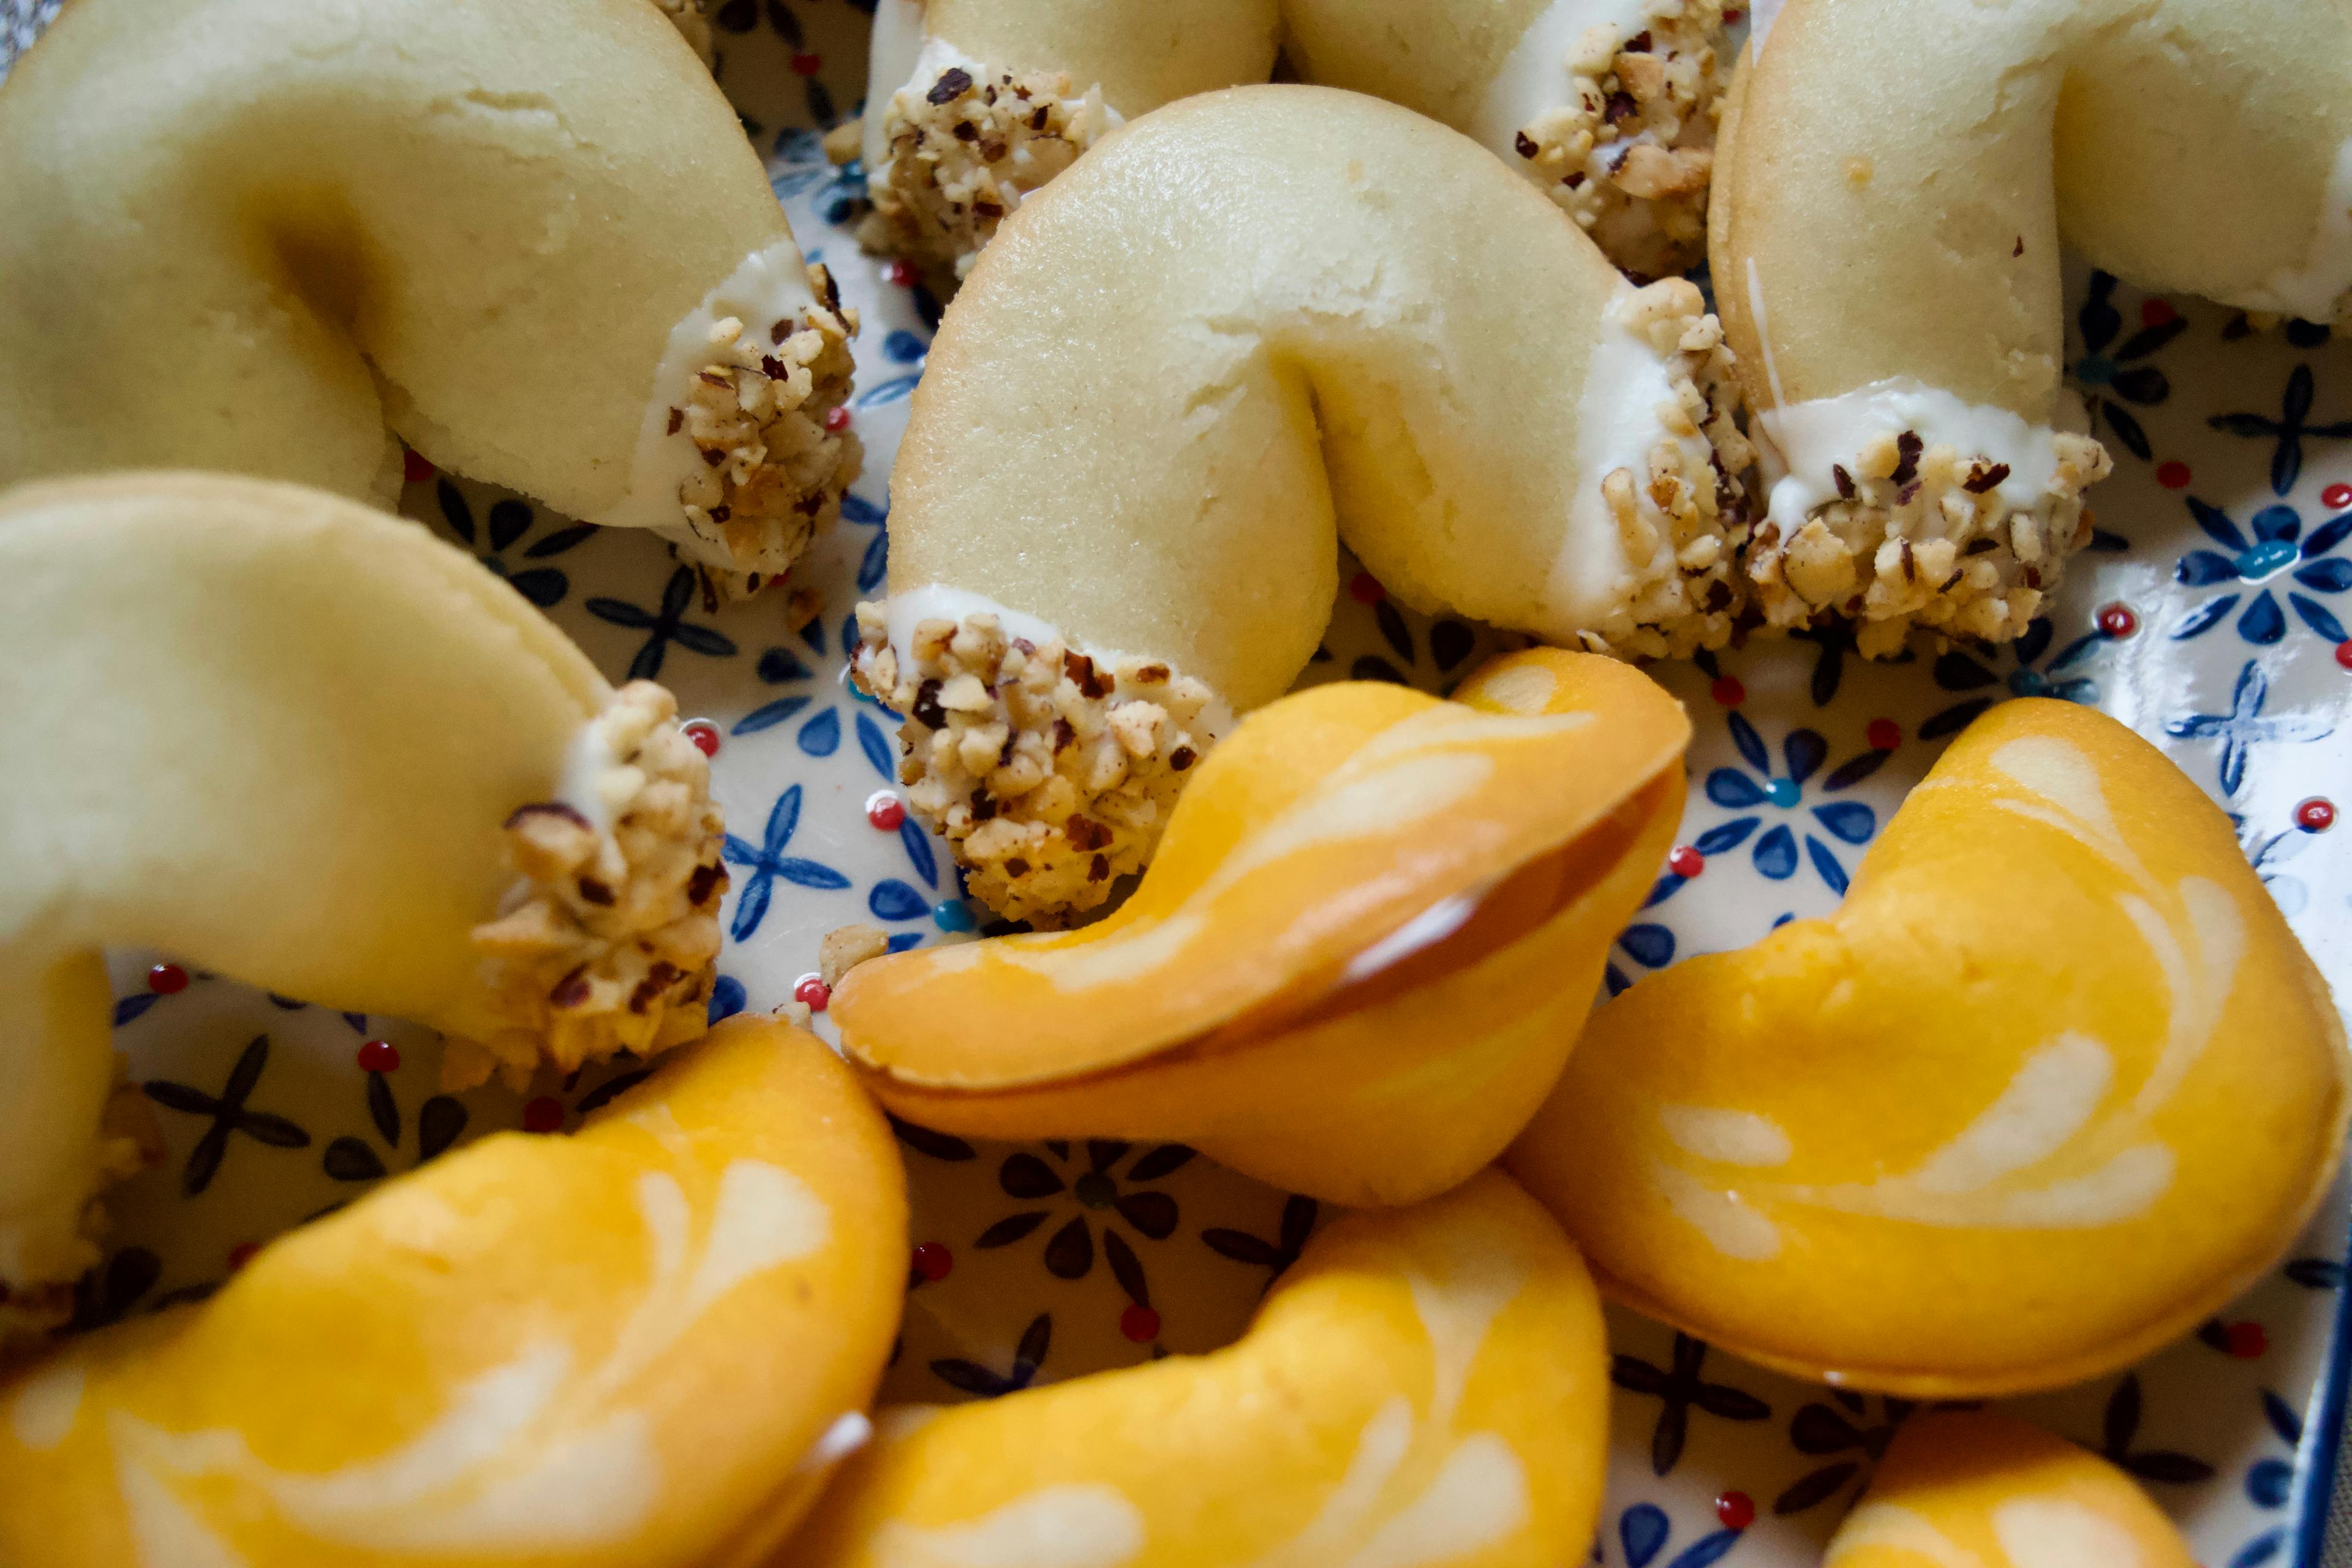 A close up of the fortune cookies on a plate